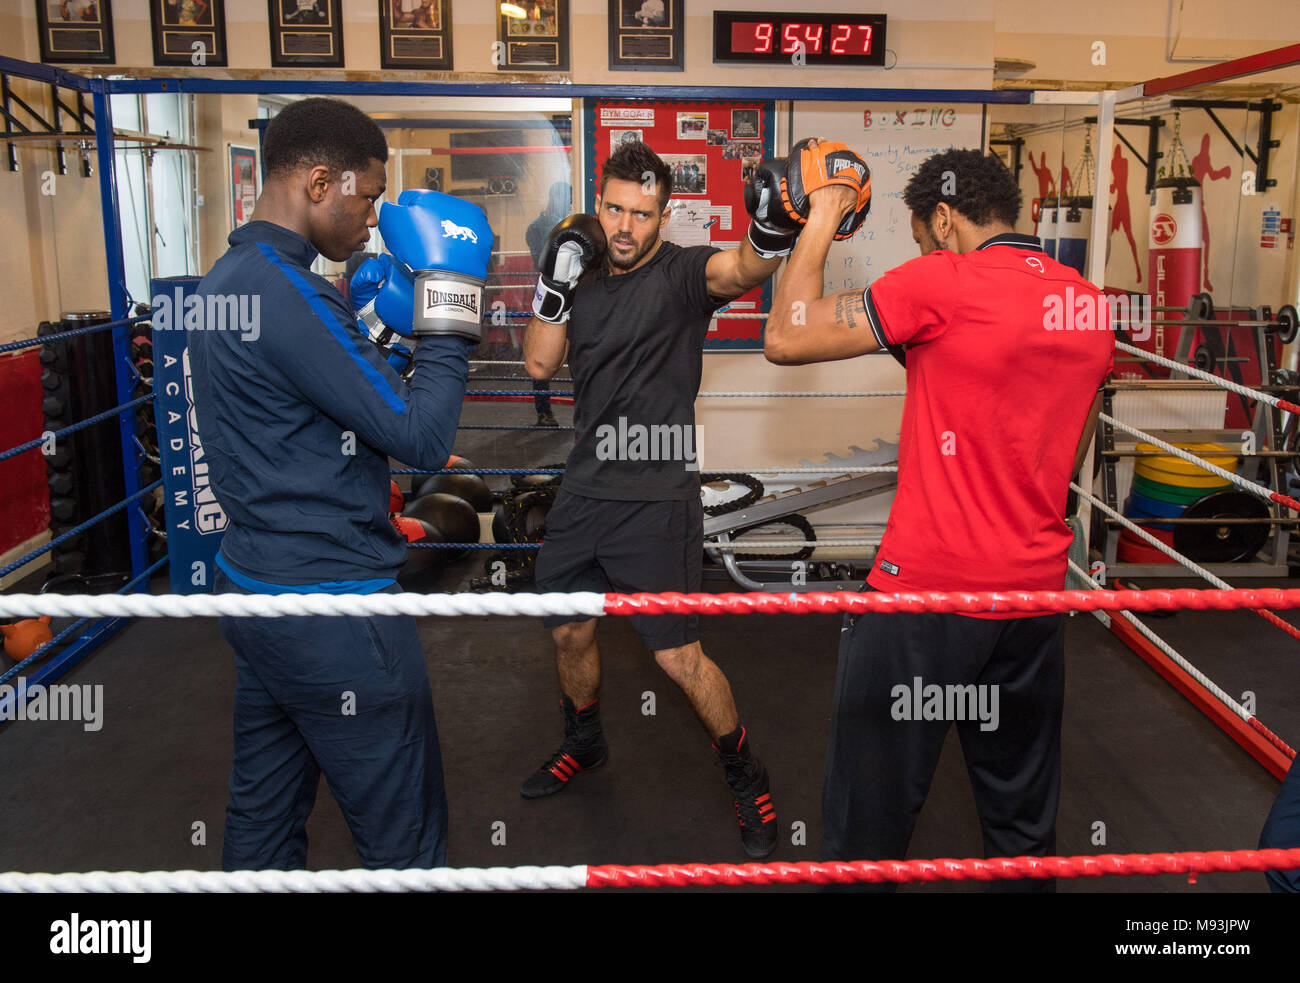 Previously unissued photo dated 13/03/18 of Spencer Matthews (centre) taking part in a training session with coach Jermaine Williams (right) and student Tipot, during a visit to the Boxing Academy, a Comic Relief funded sport project in Hackney, London, ahead of Sport Relief boxing challenge. Stock Photo